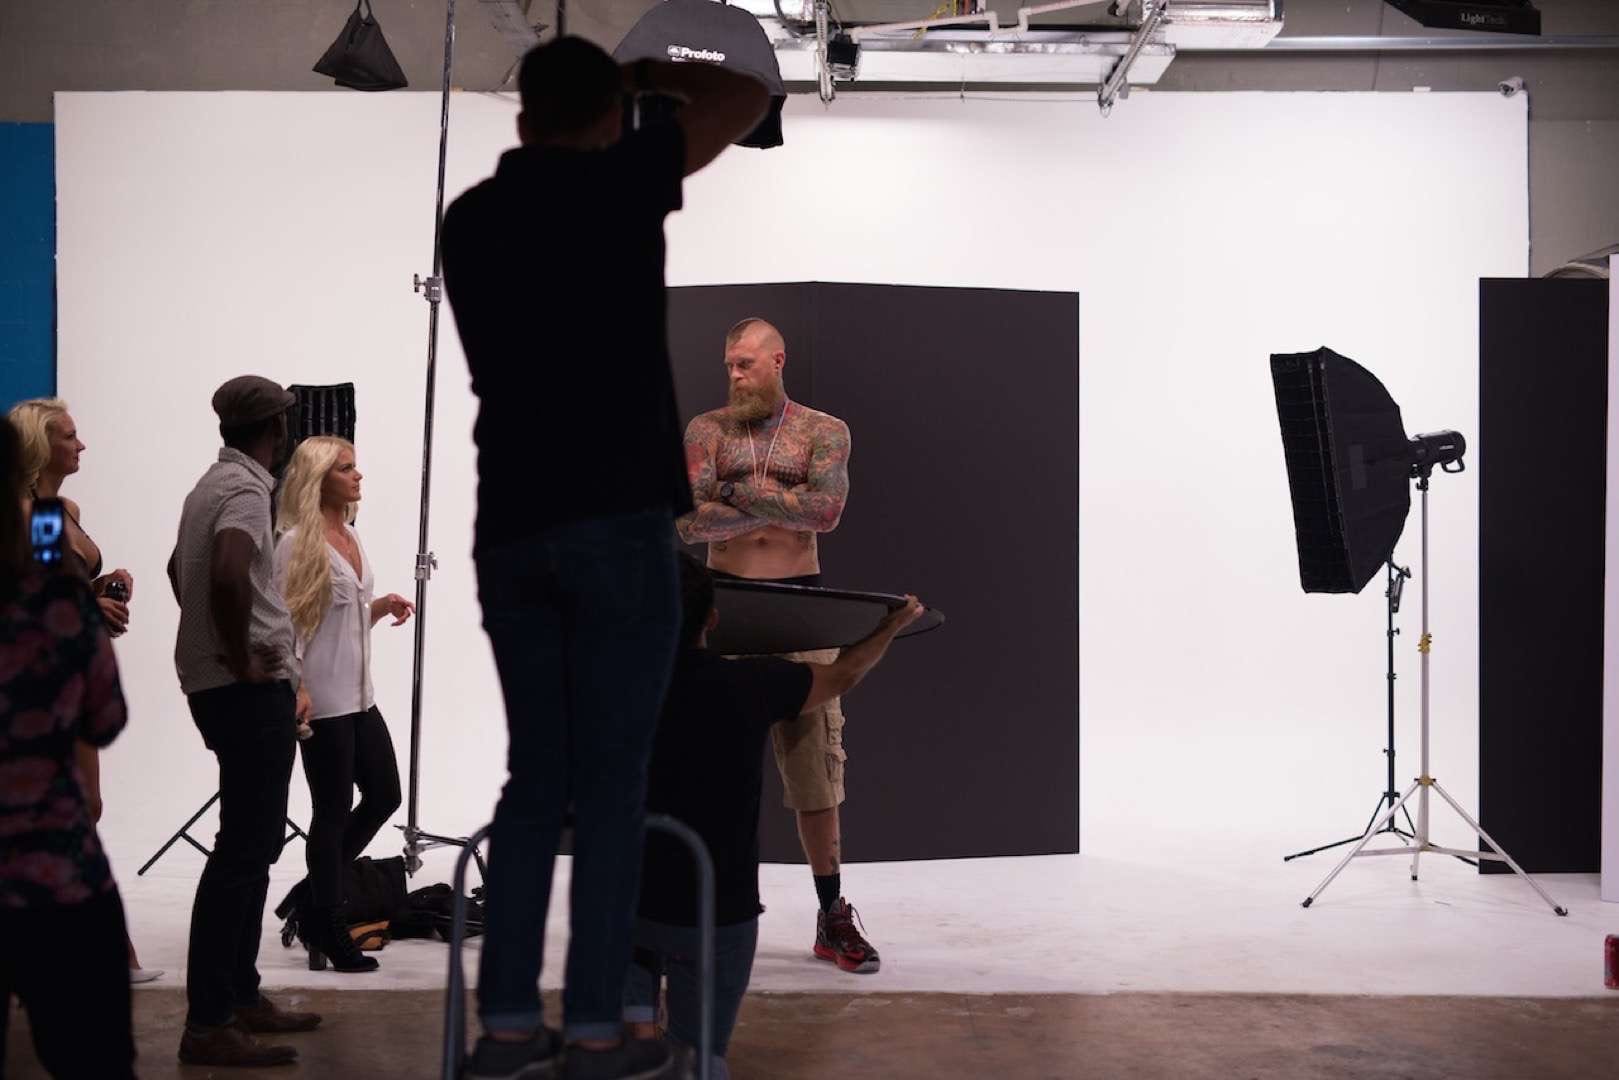 Tattooed man with mohawk posing for camera man and crew